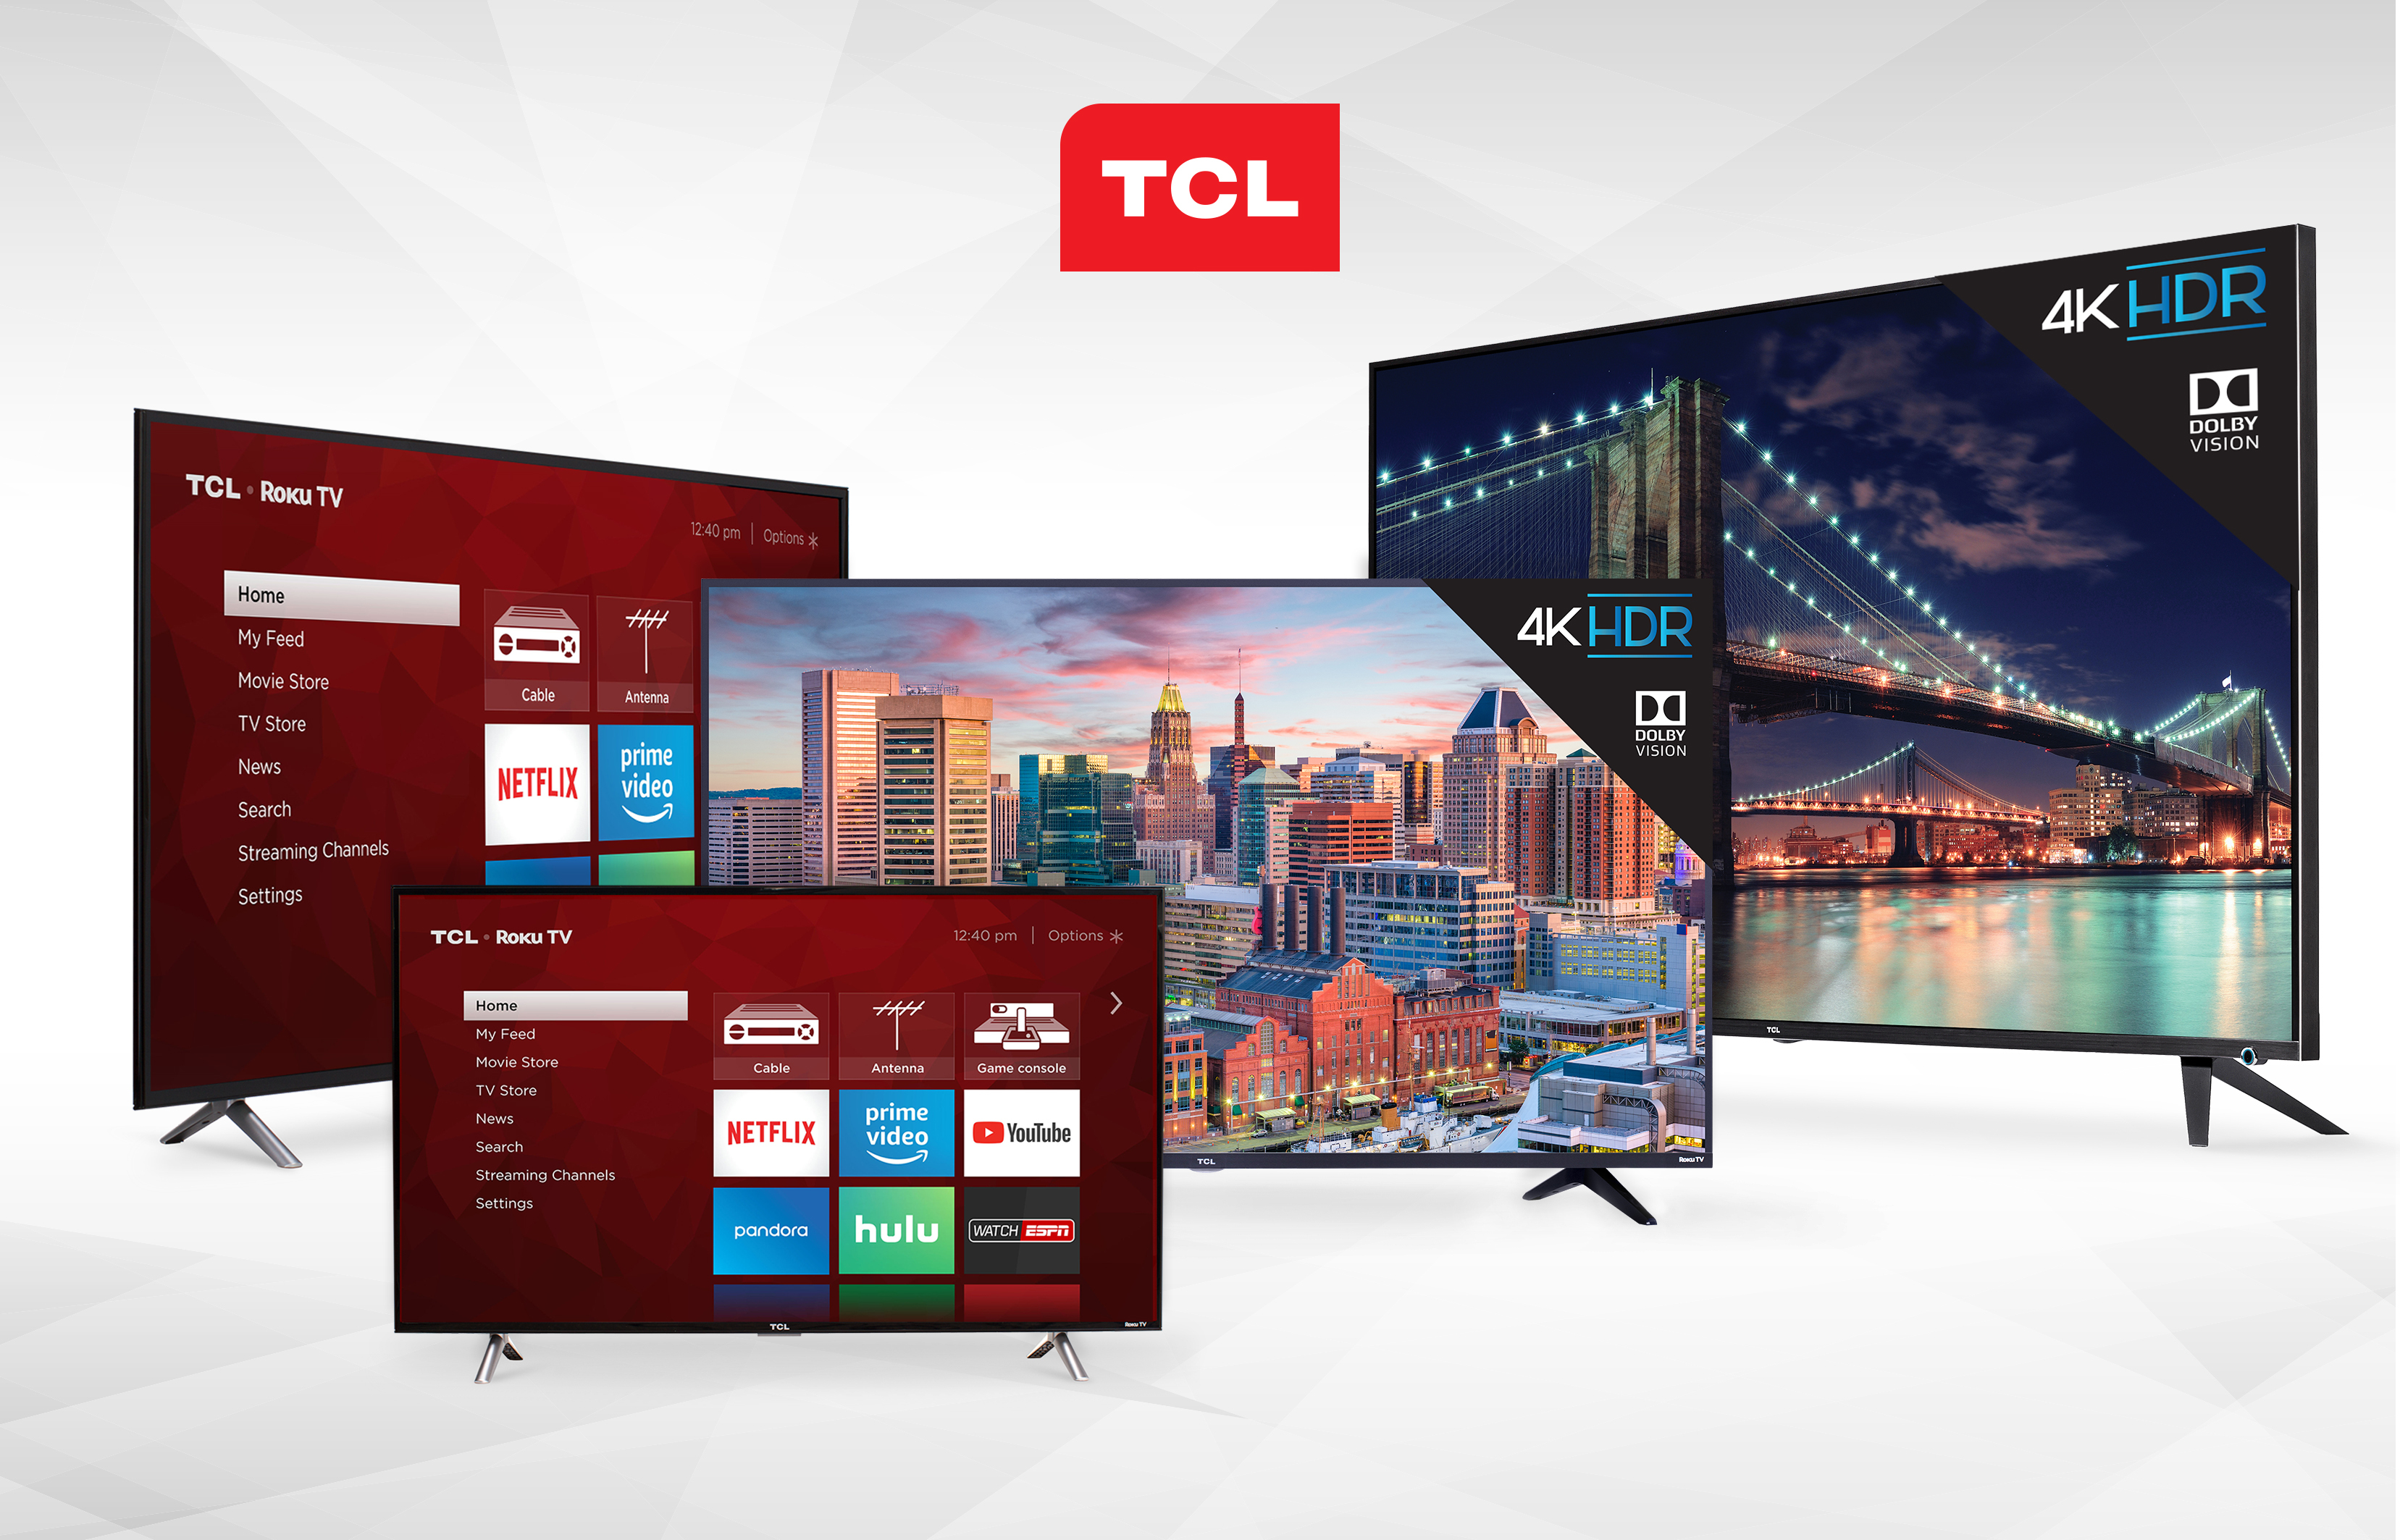 Tcl Tops Its 2018 Tv Line With Powerful 4k Hdr Performance In The